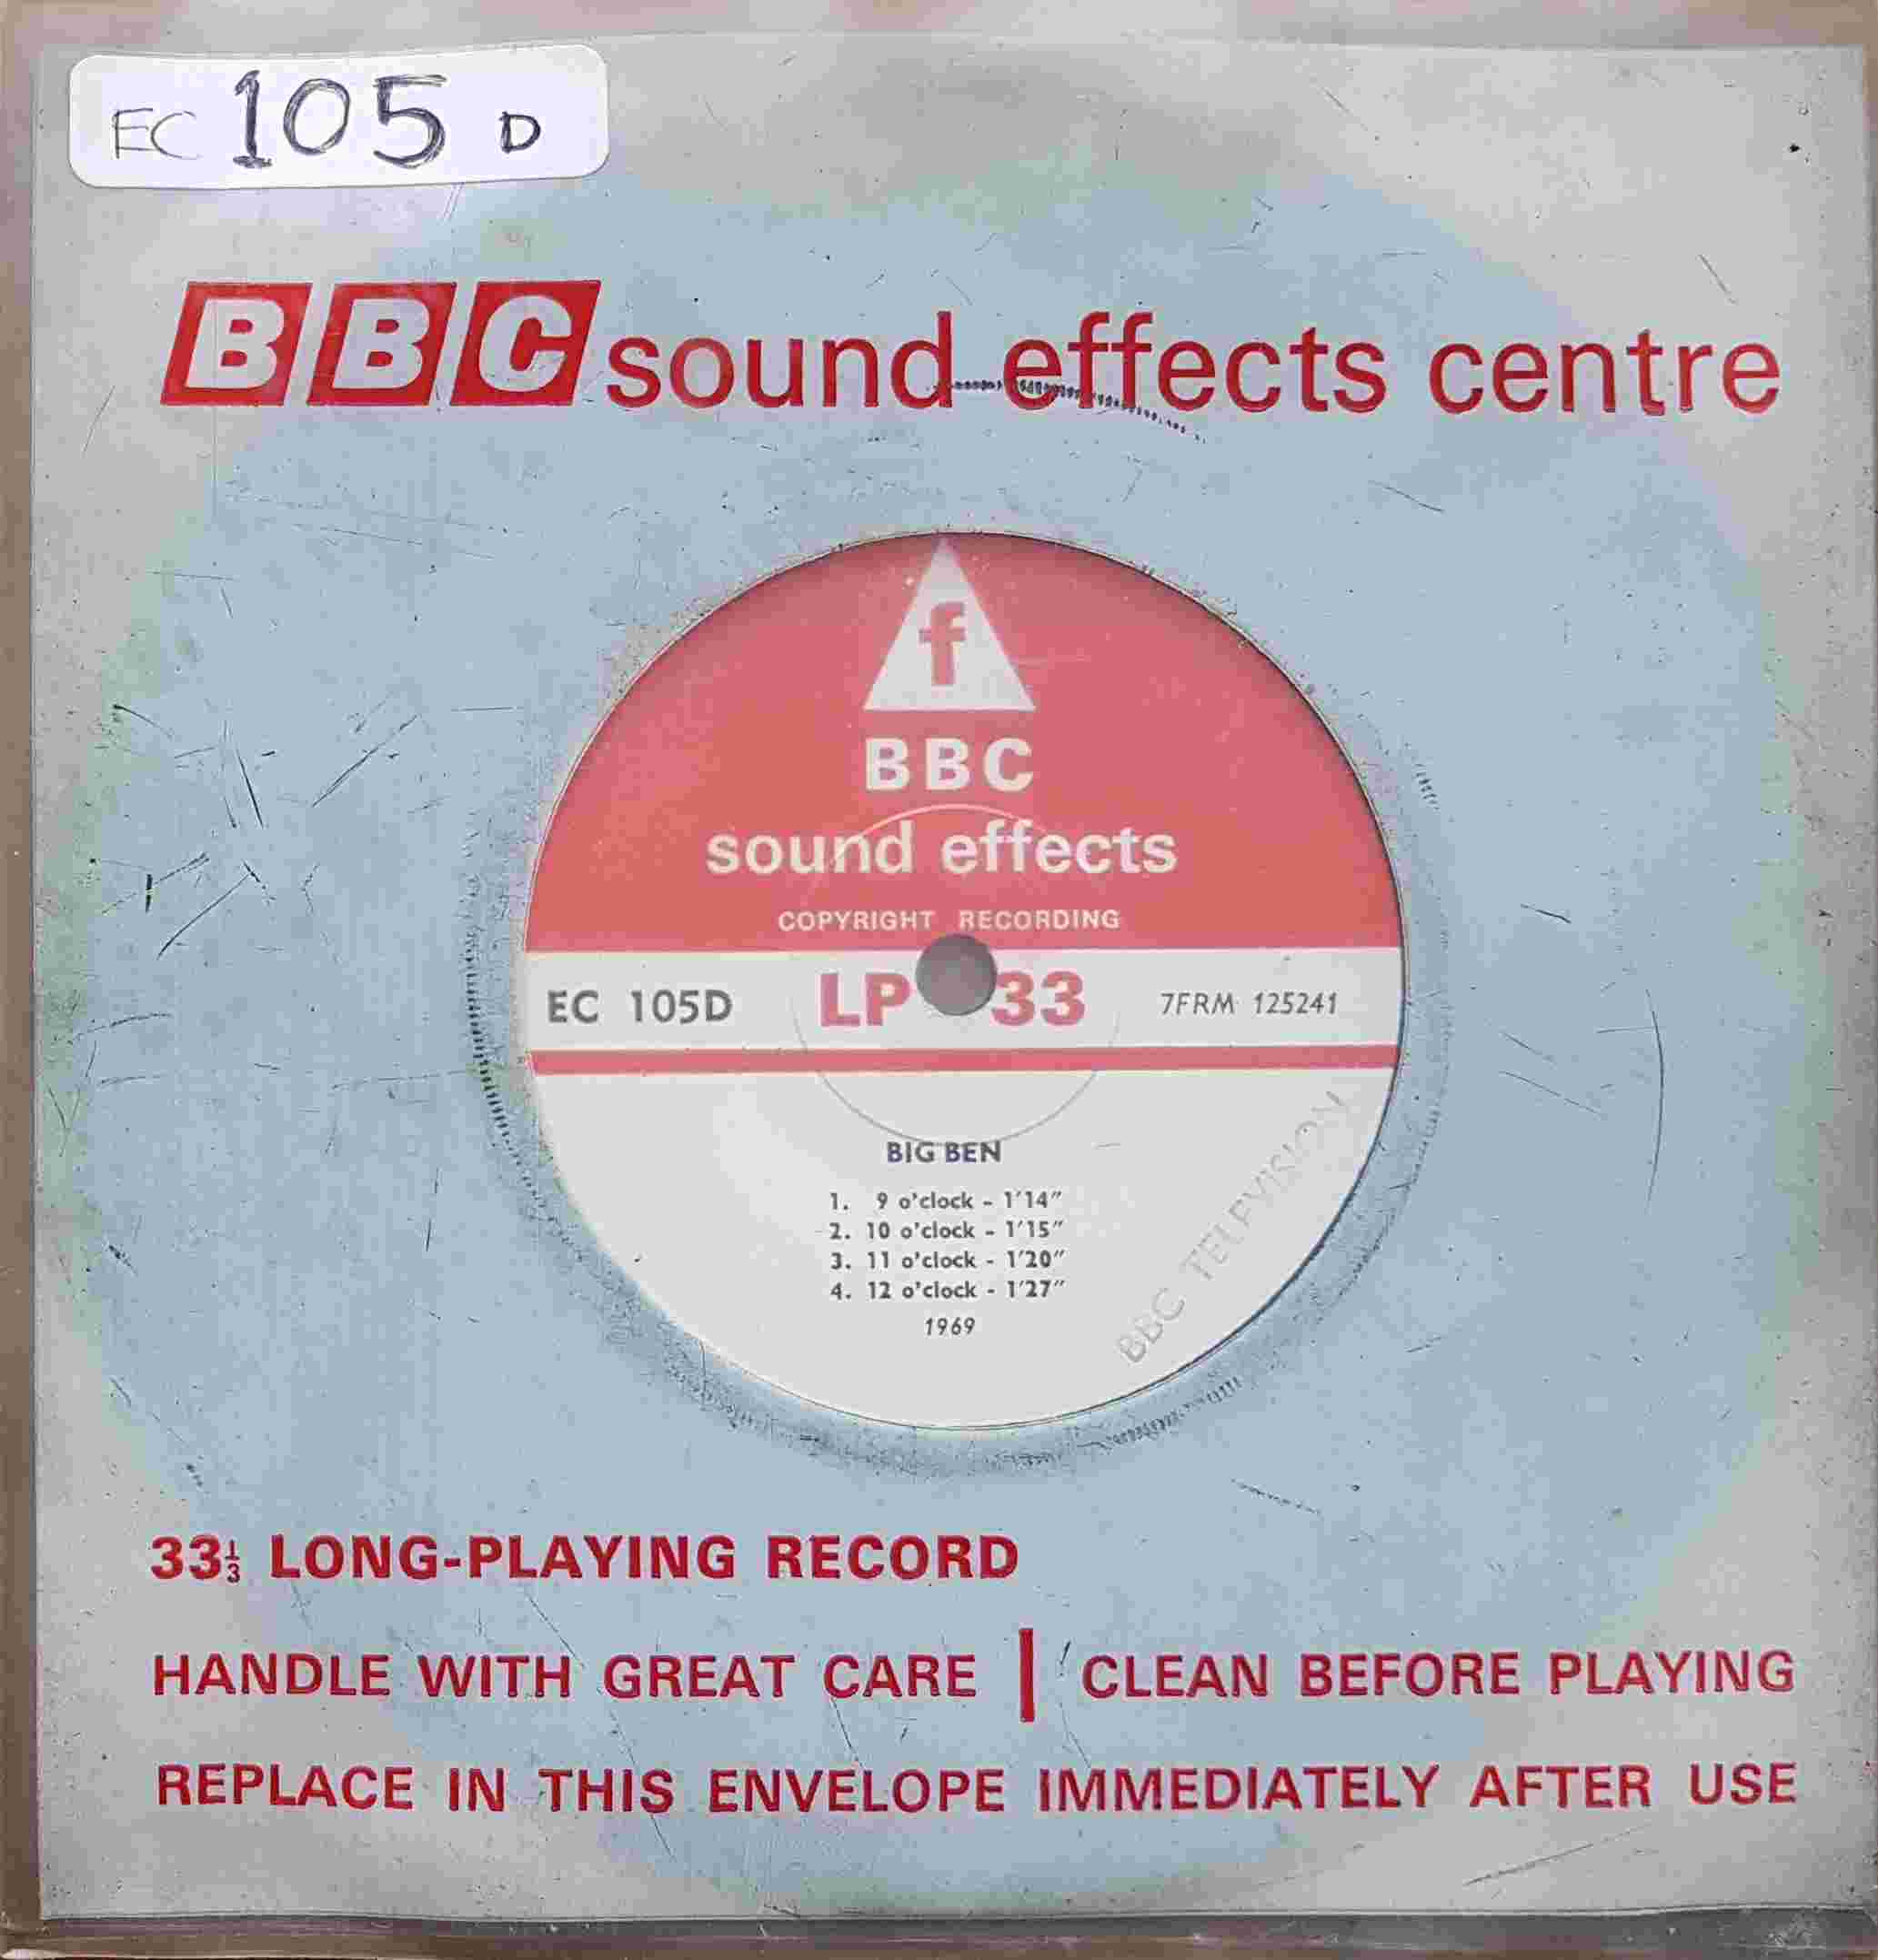 Picture of EC 105D Big Ben by artist Not registered from the BBC singles - Records and Tapes library